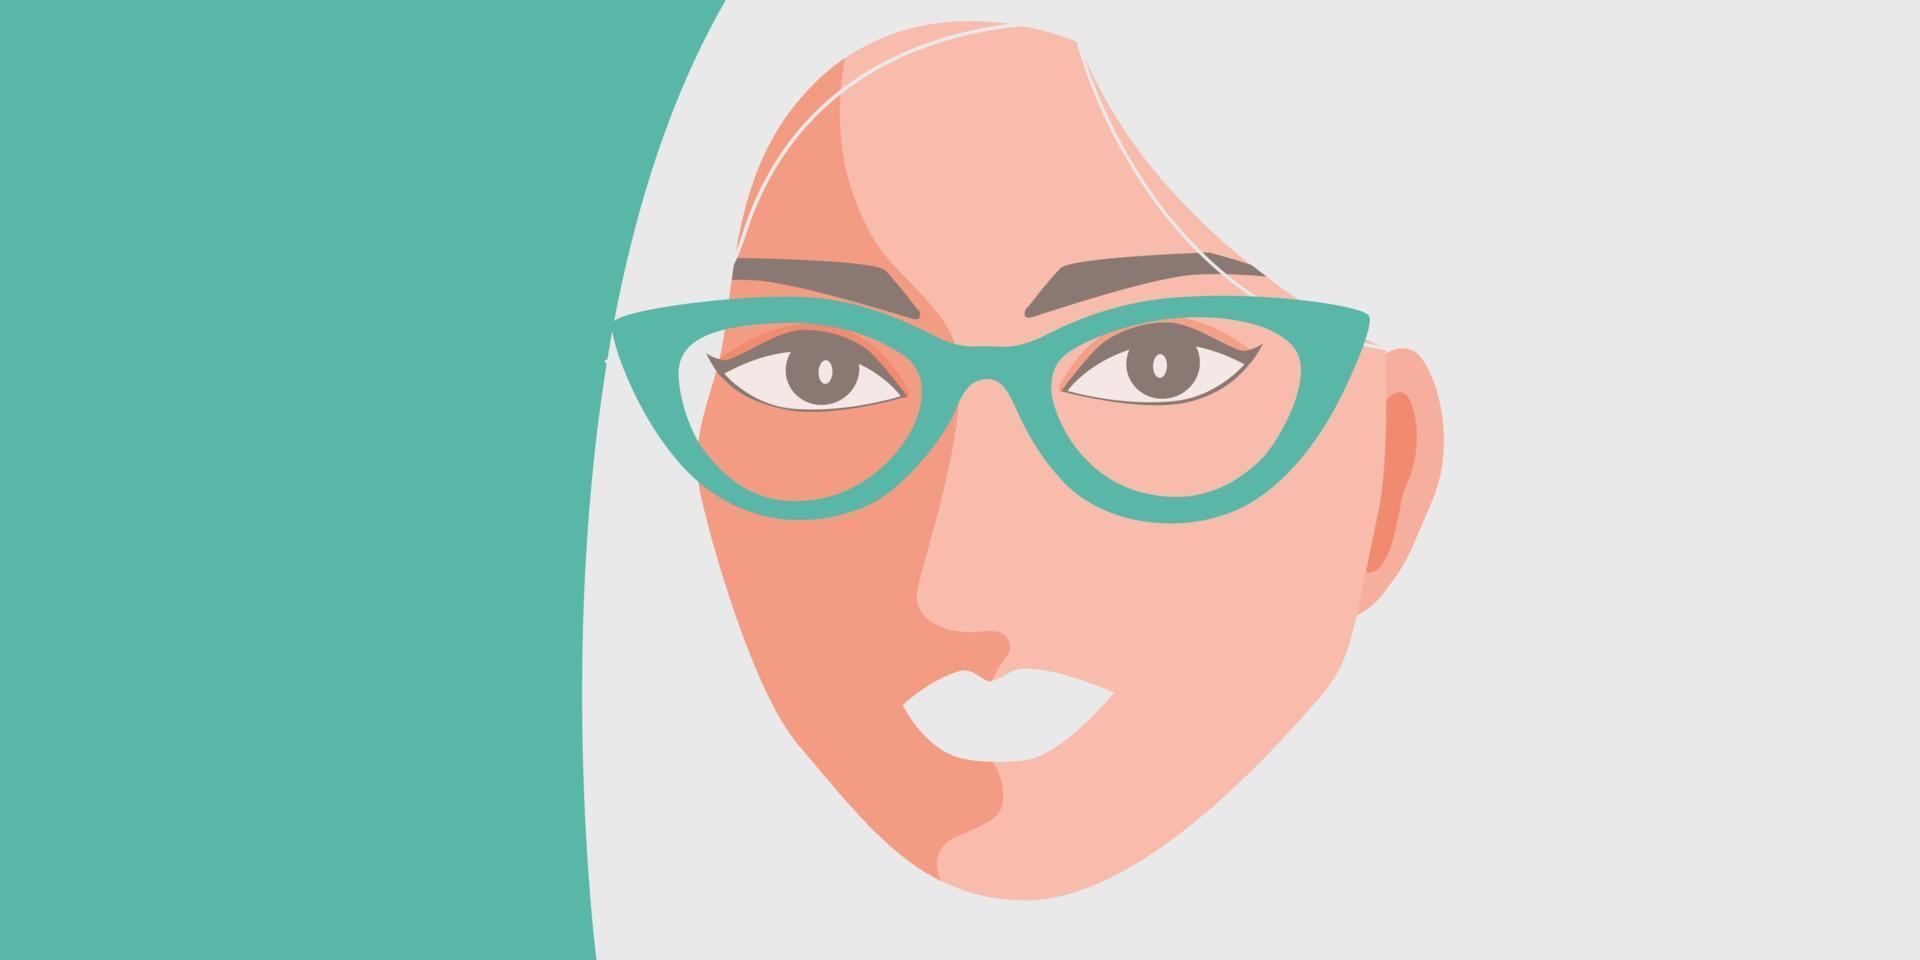 Eye glasses and sunglasses on vintage green banner. Flat vector. vector